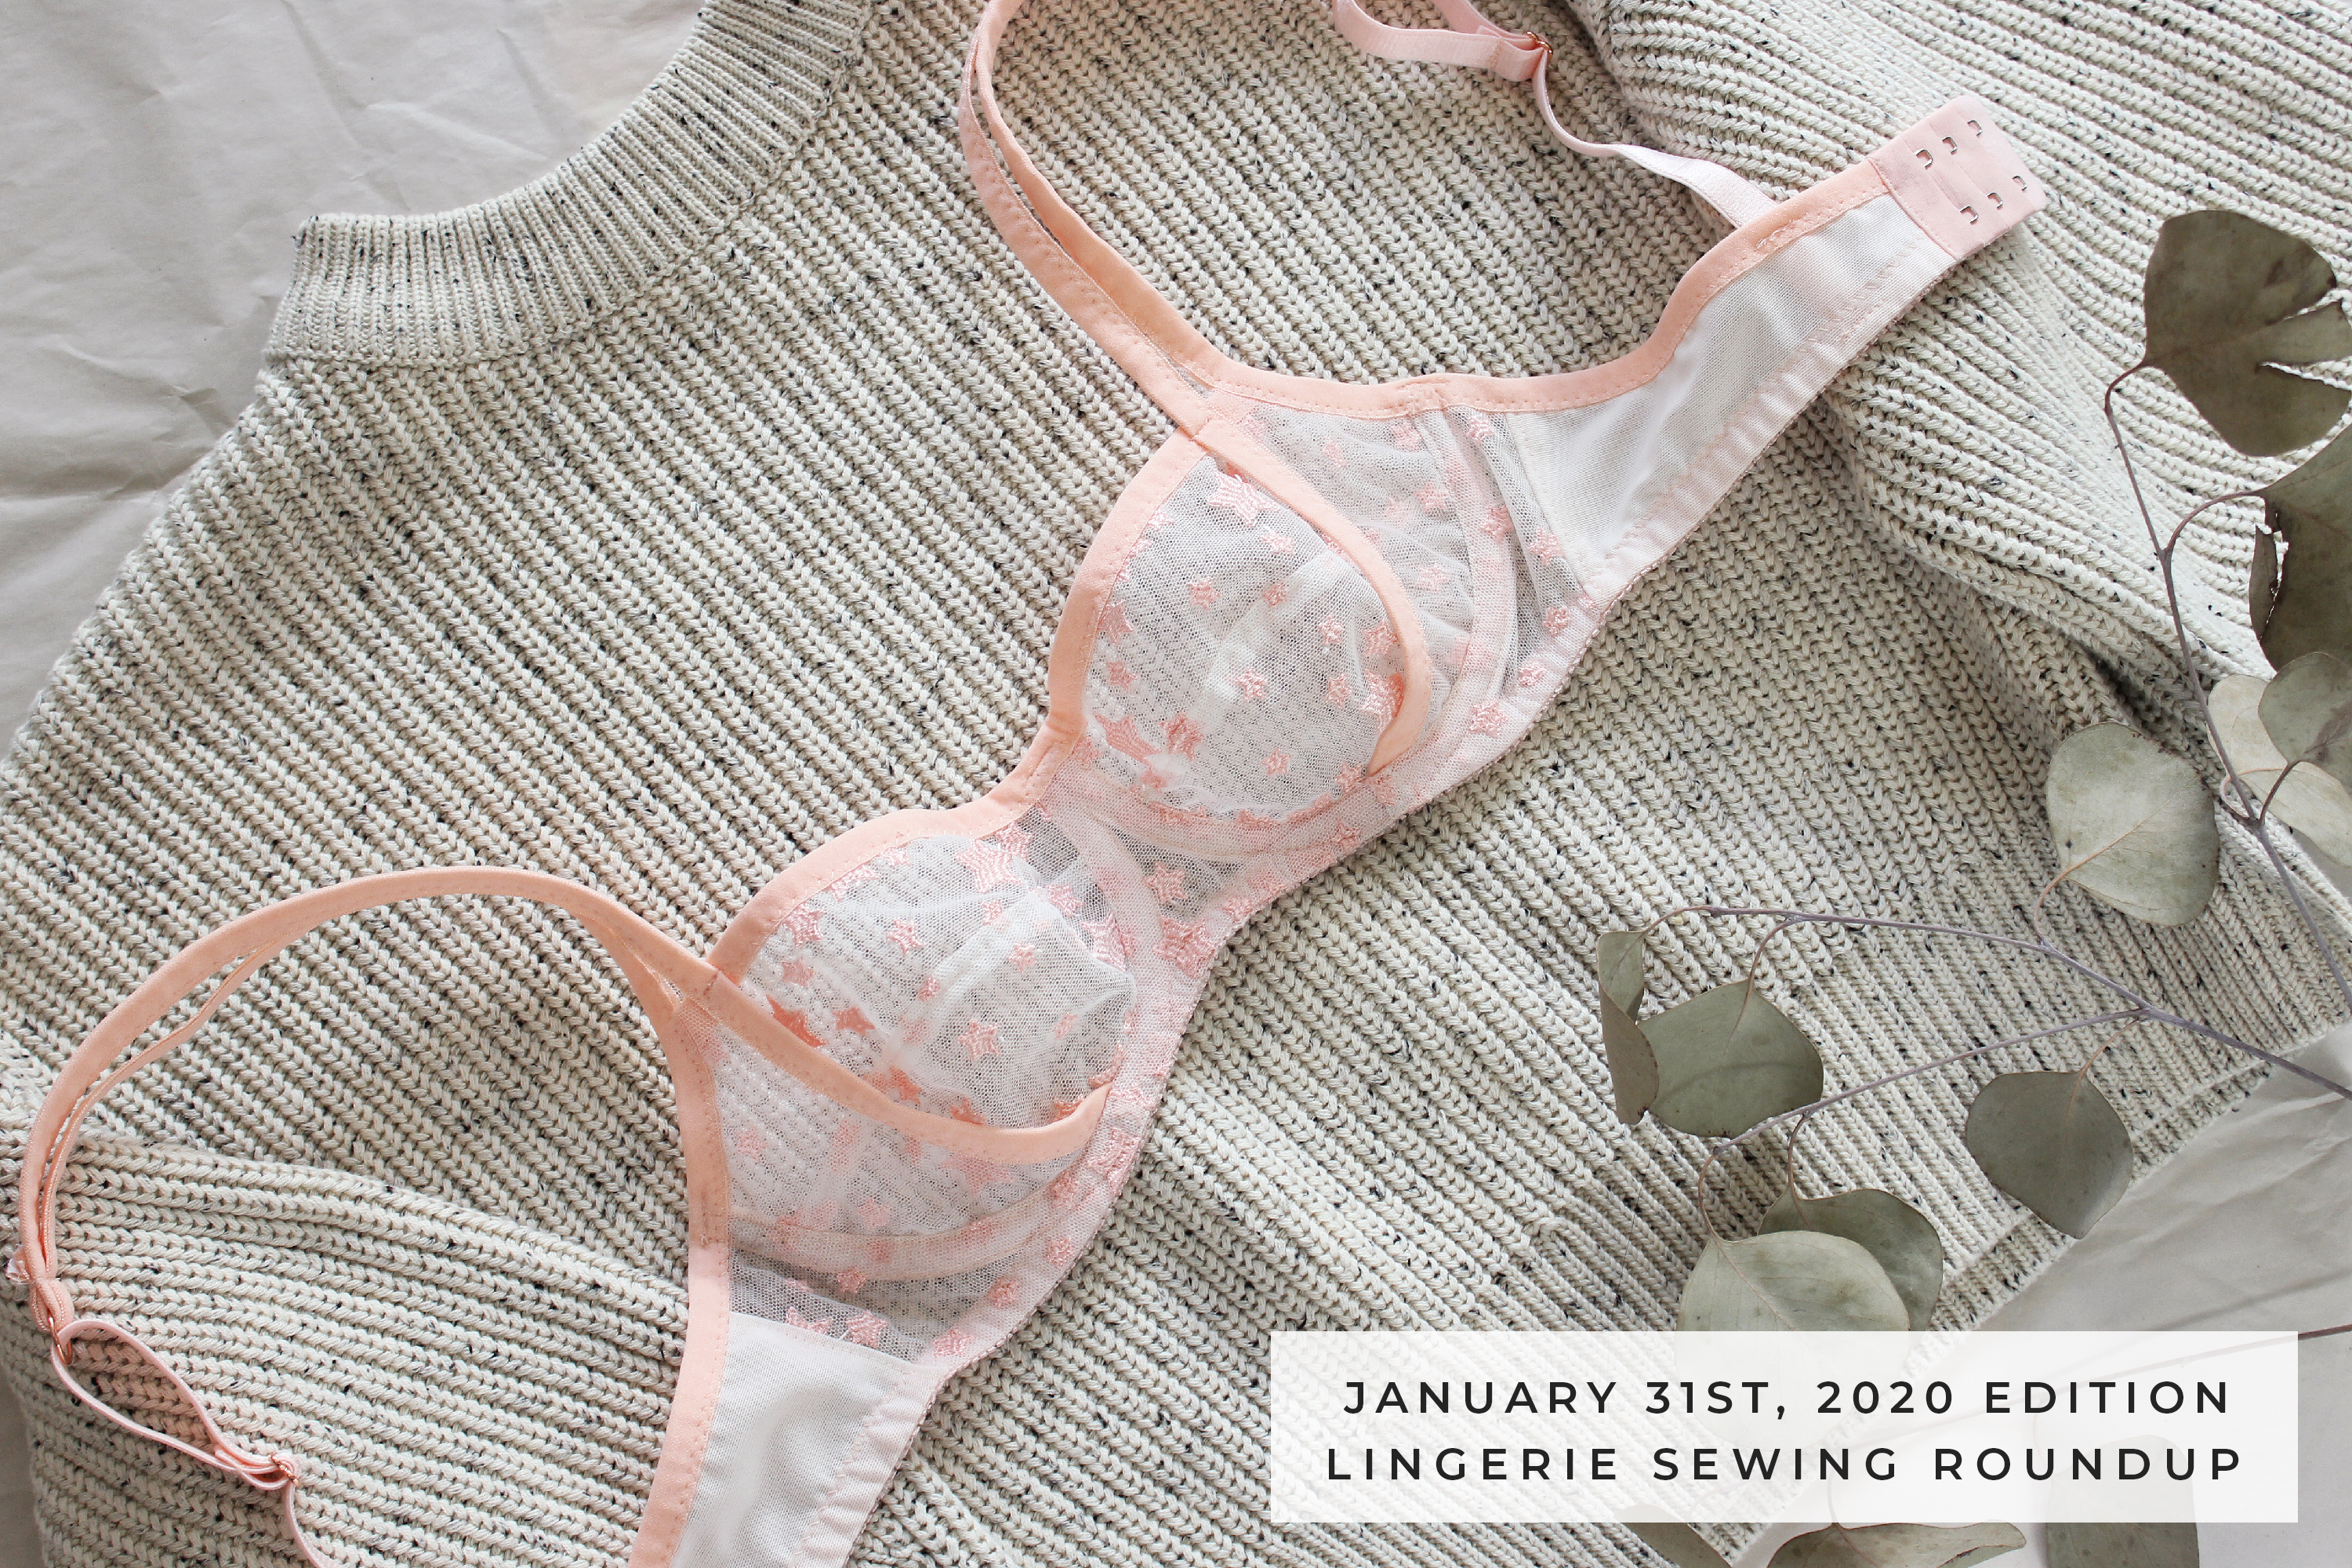 Sew Panty Party! - Emerald Erin